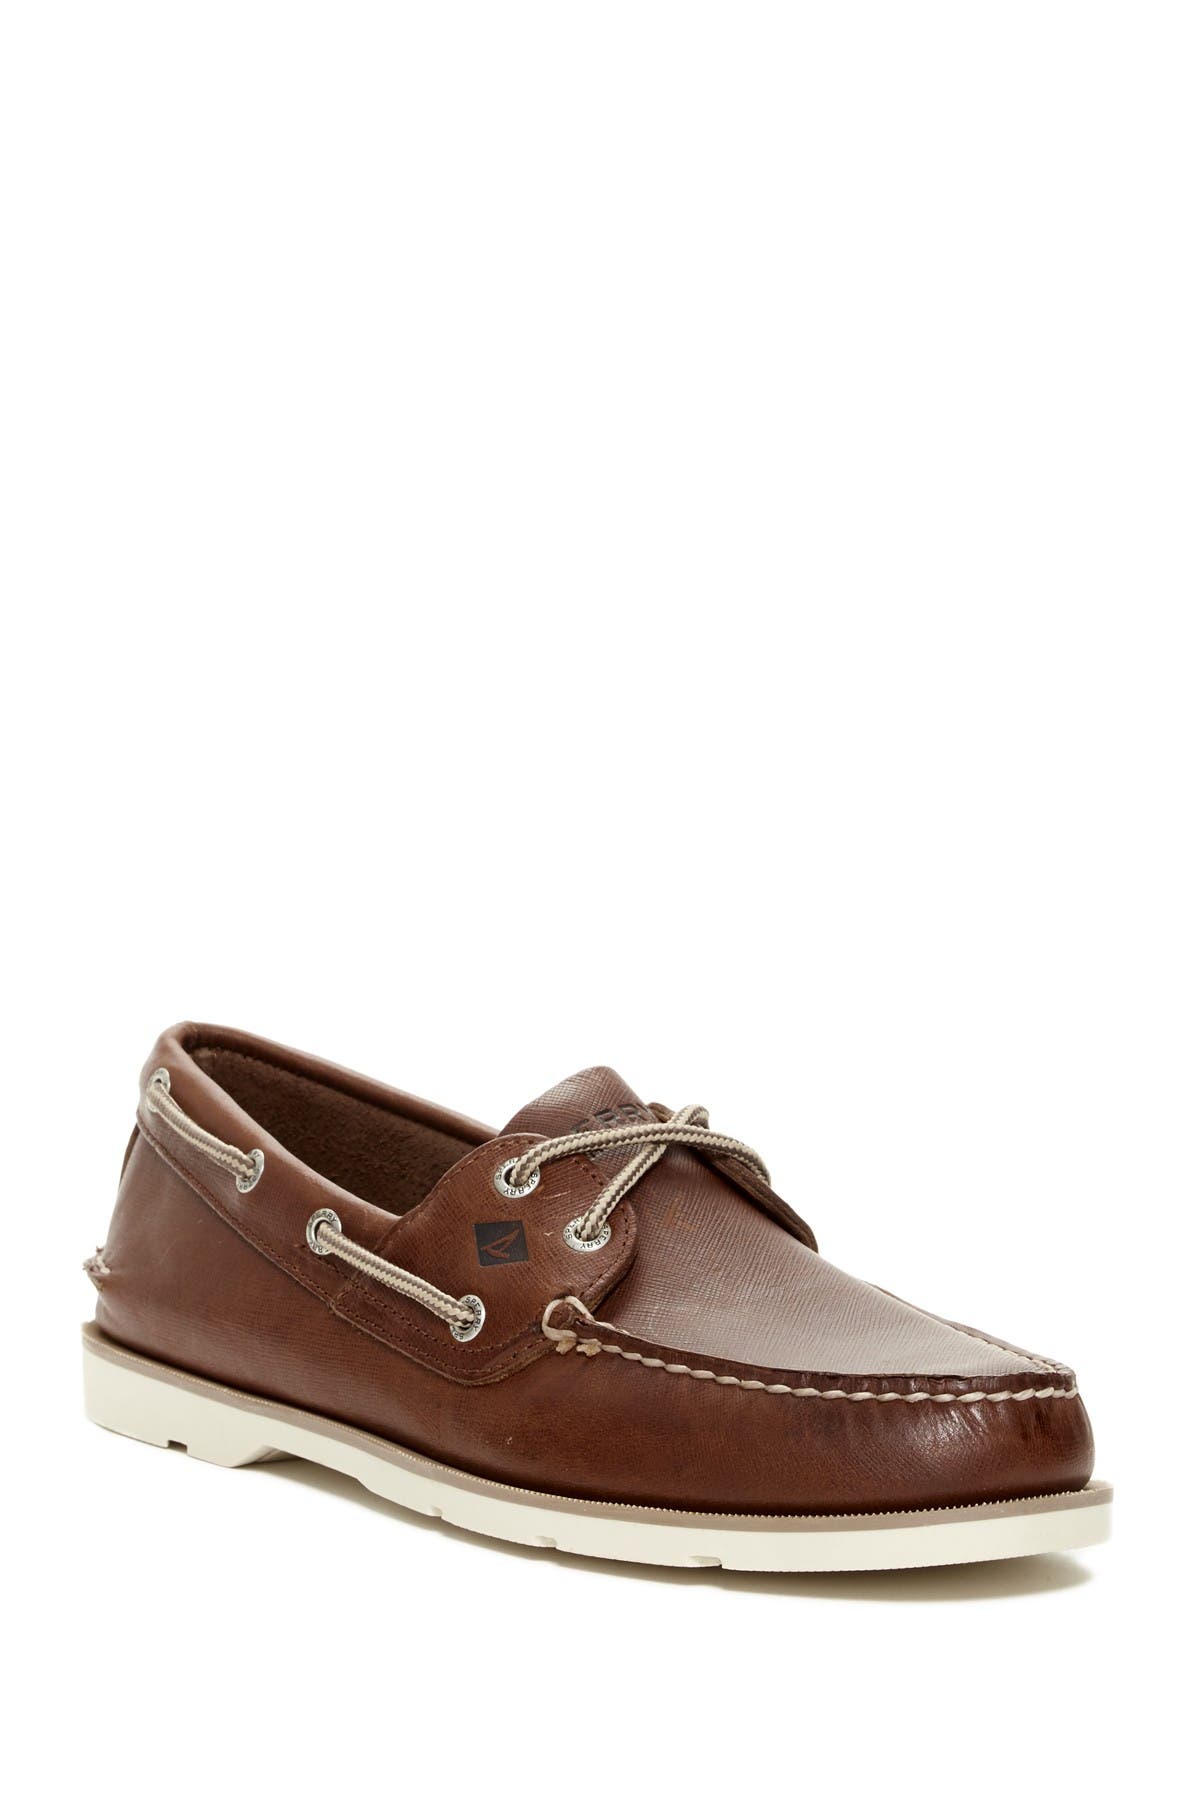 sperry leather shoes